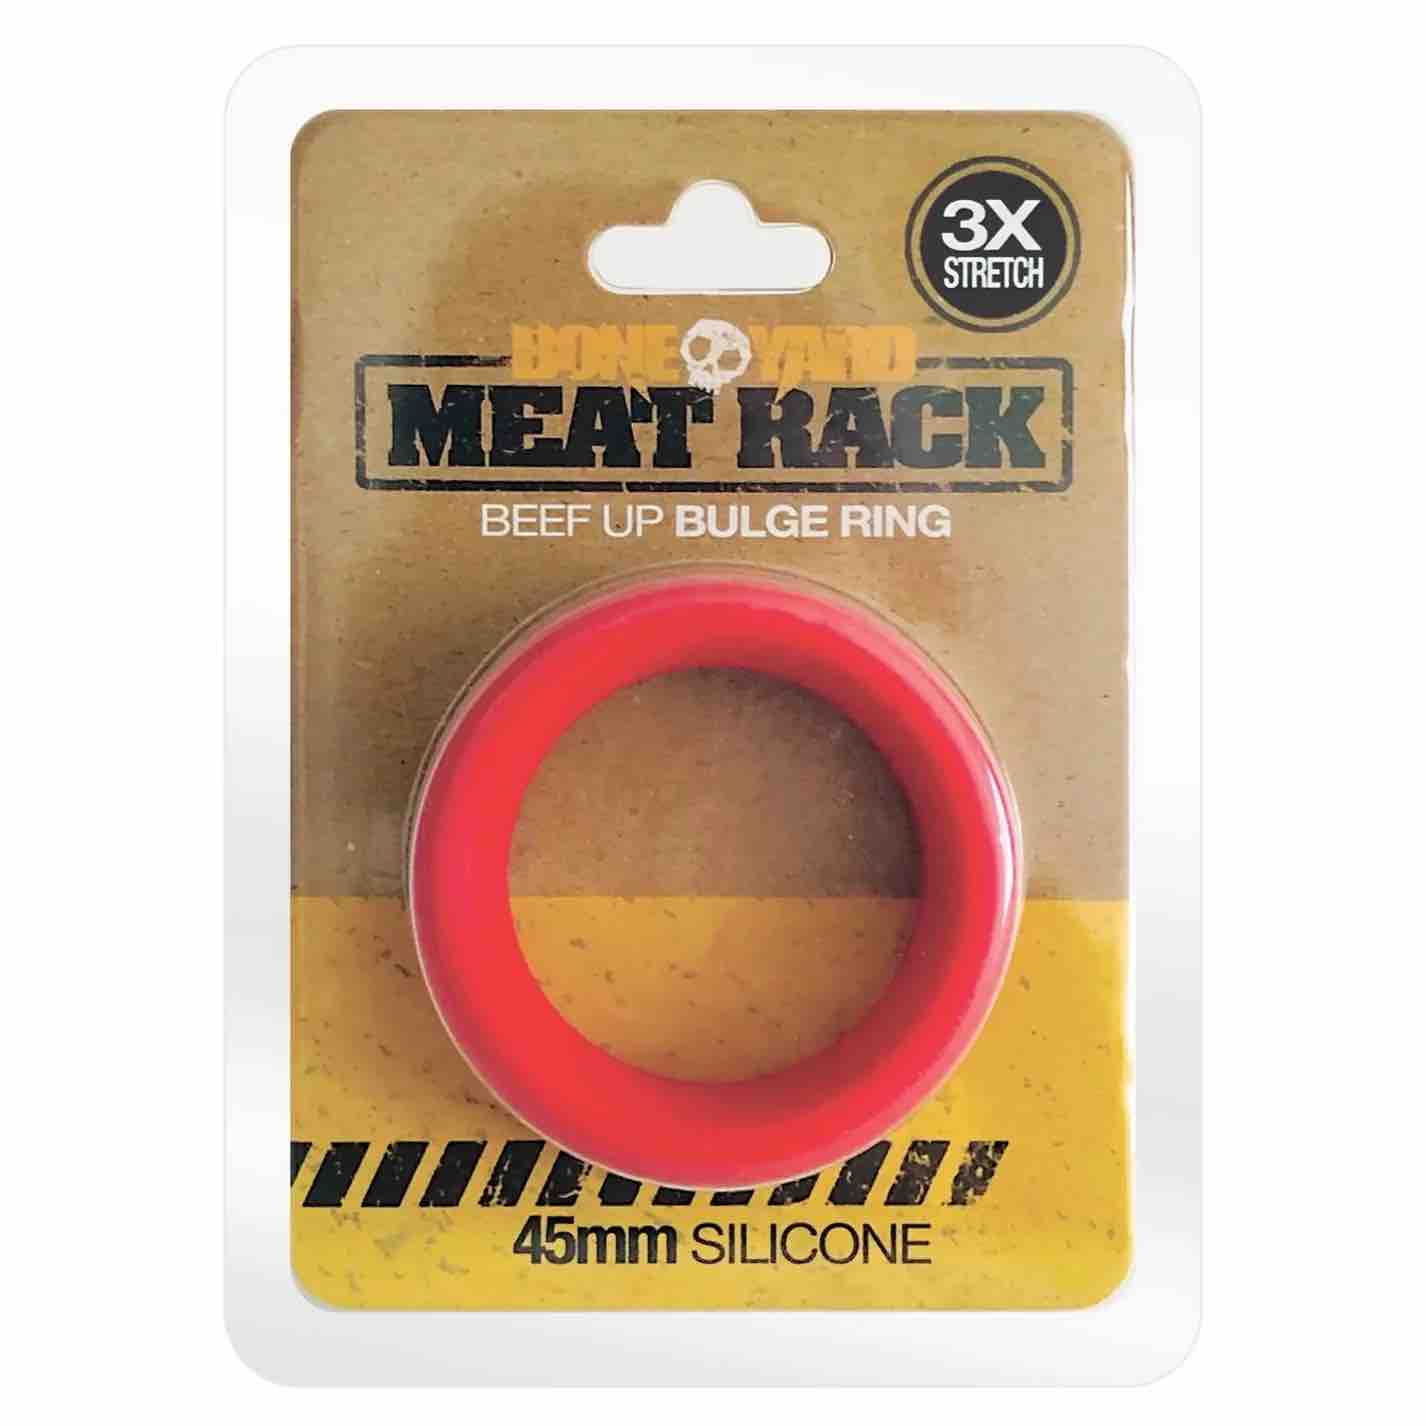 The front of the  packaging for the red Meat Rack Cock Ring.